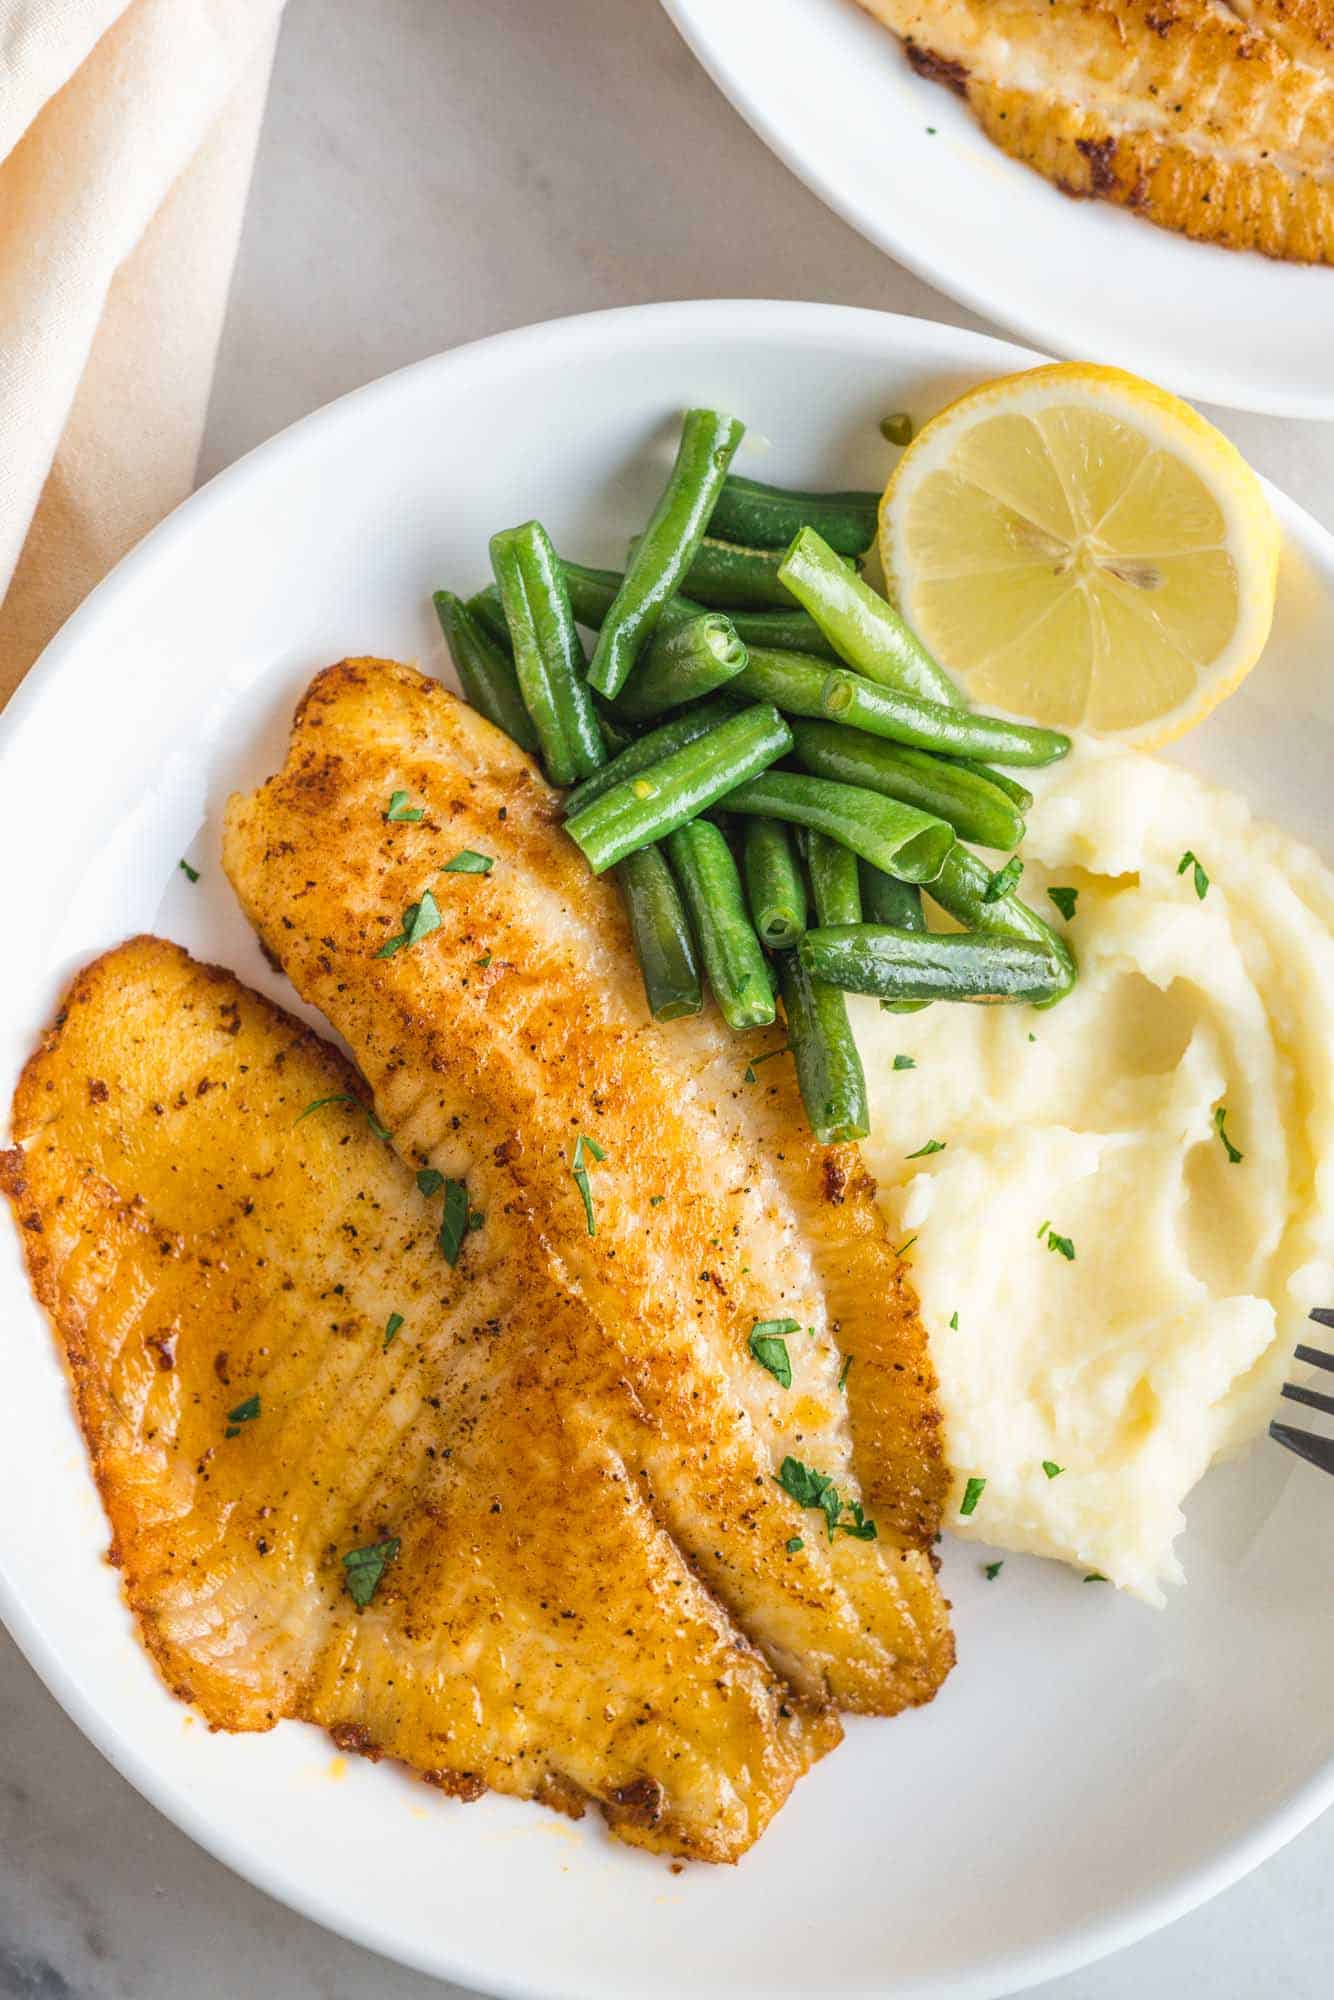 A white dinner plate filled with pan seared tilapia, green beans, mashed potatoes, and a half a lemon